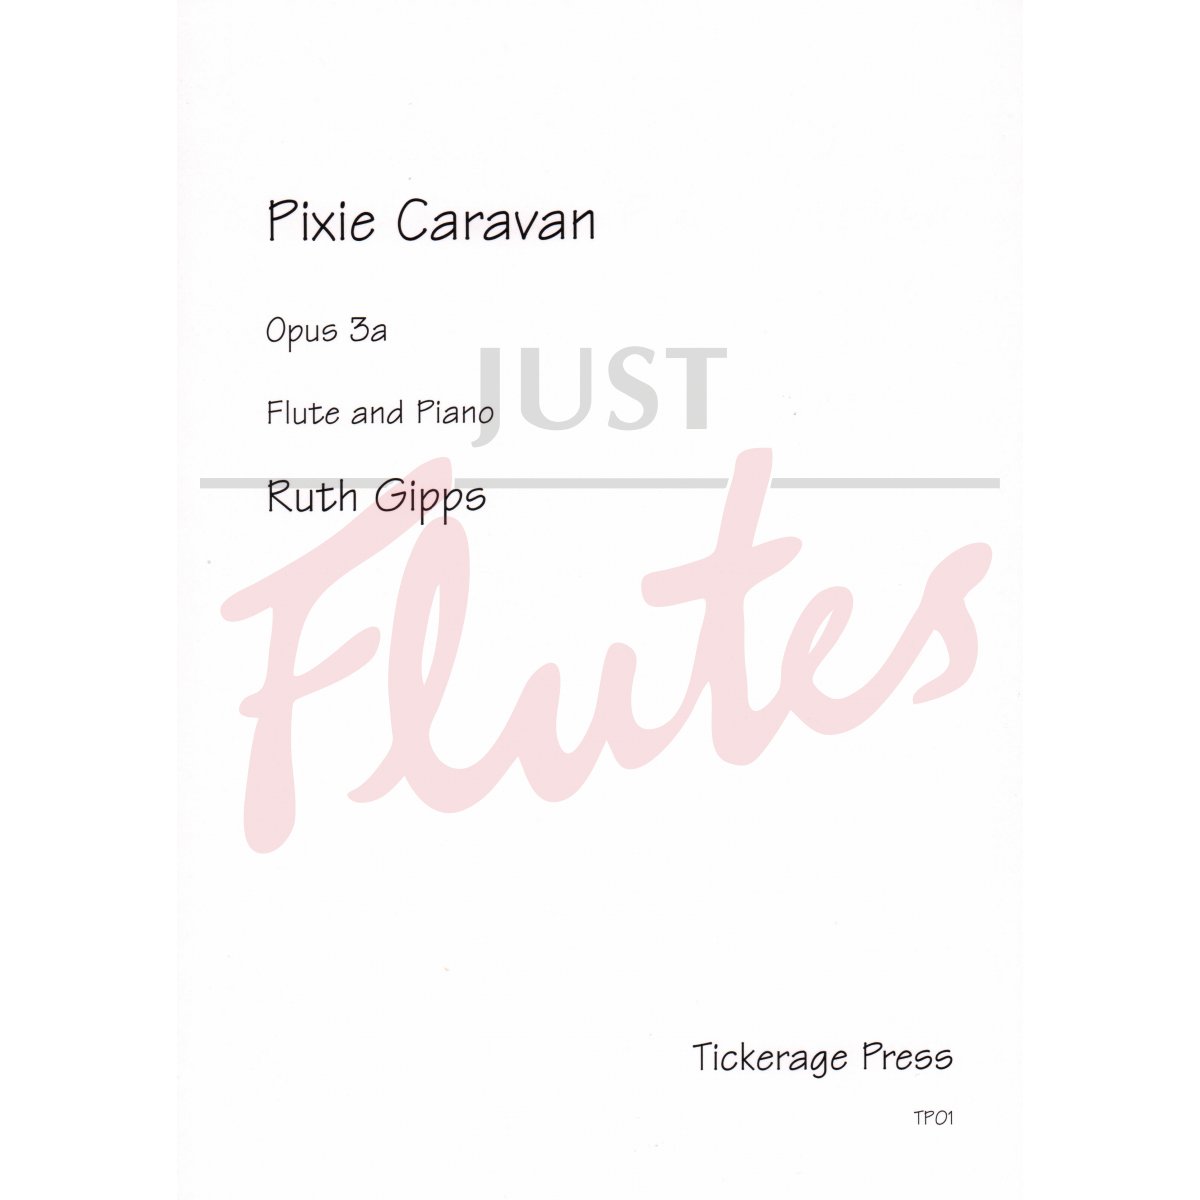 Pixie Caravan for Flute and Piano